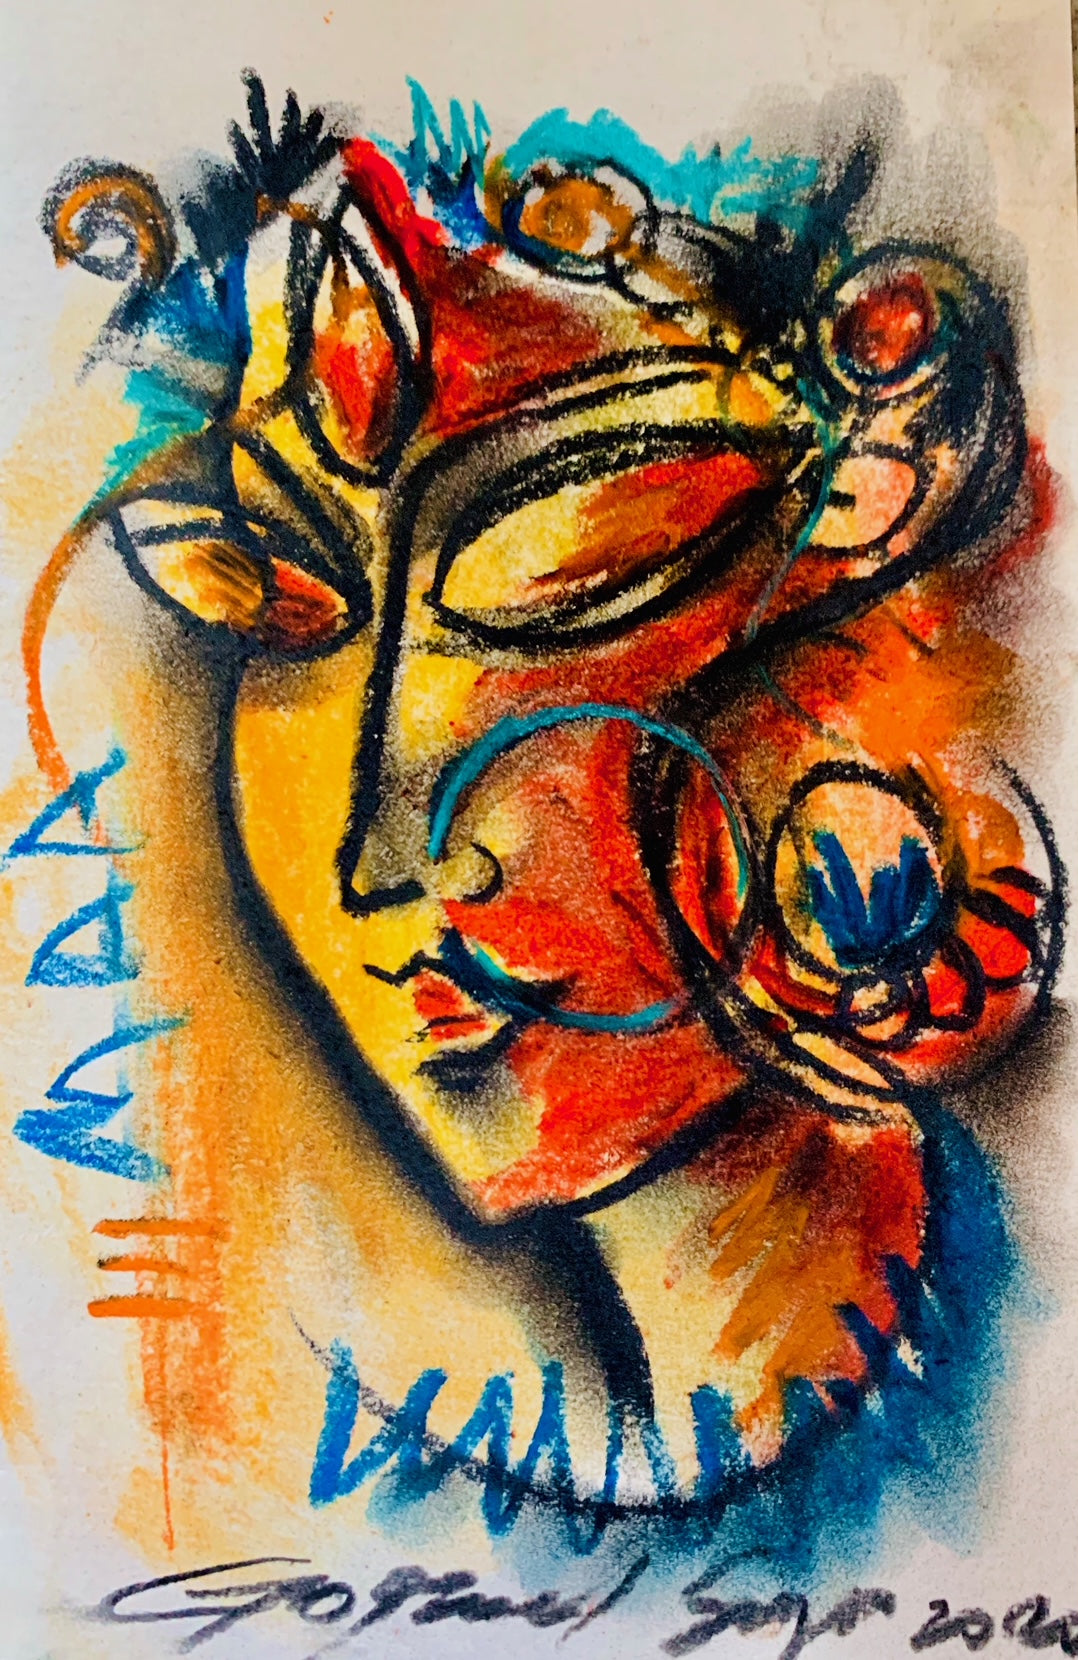 Buy Shakti Painting the original Matted Charcoal and Pastel on Paper artwork by Indian-American artist Gopaal Seyn | RedBlueArts.com